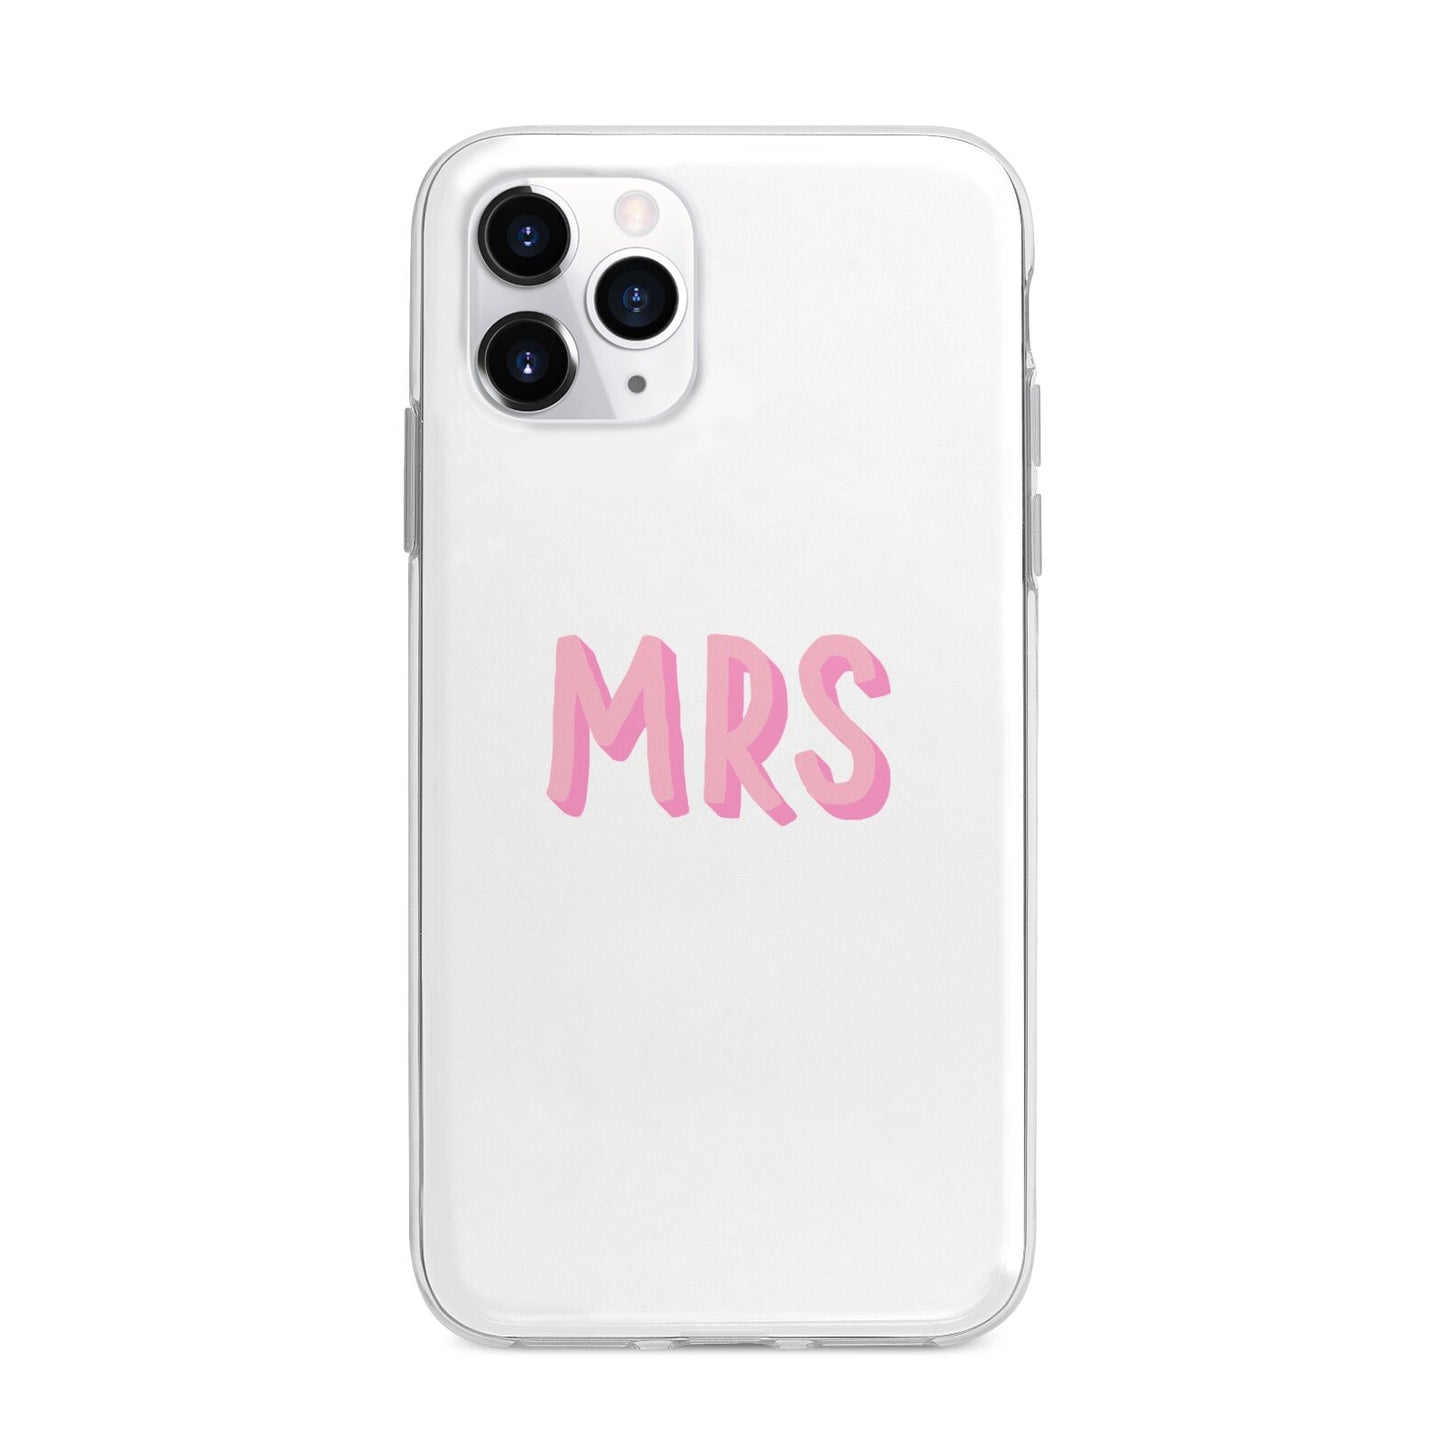 Mrs Apple iPhone 11 Pro in Silver with Bumper Case